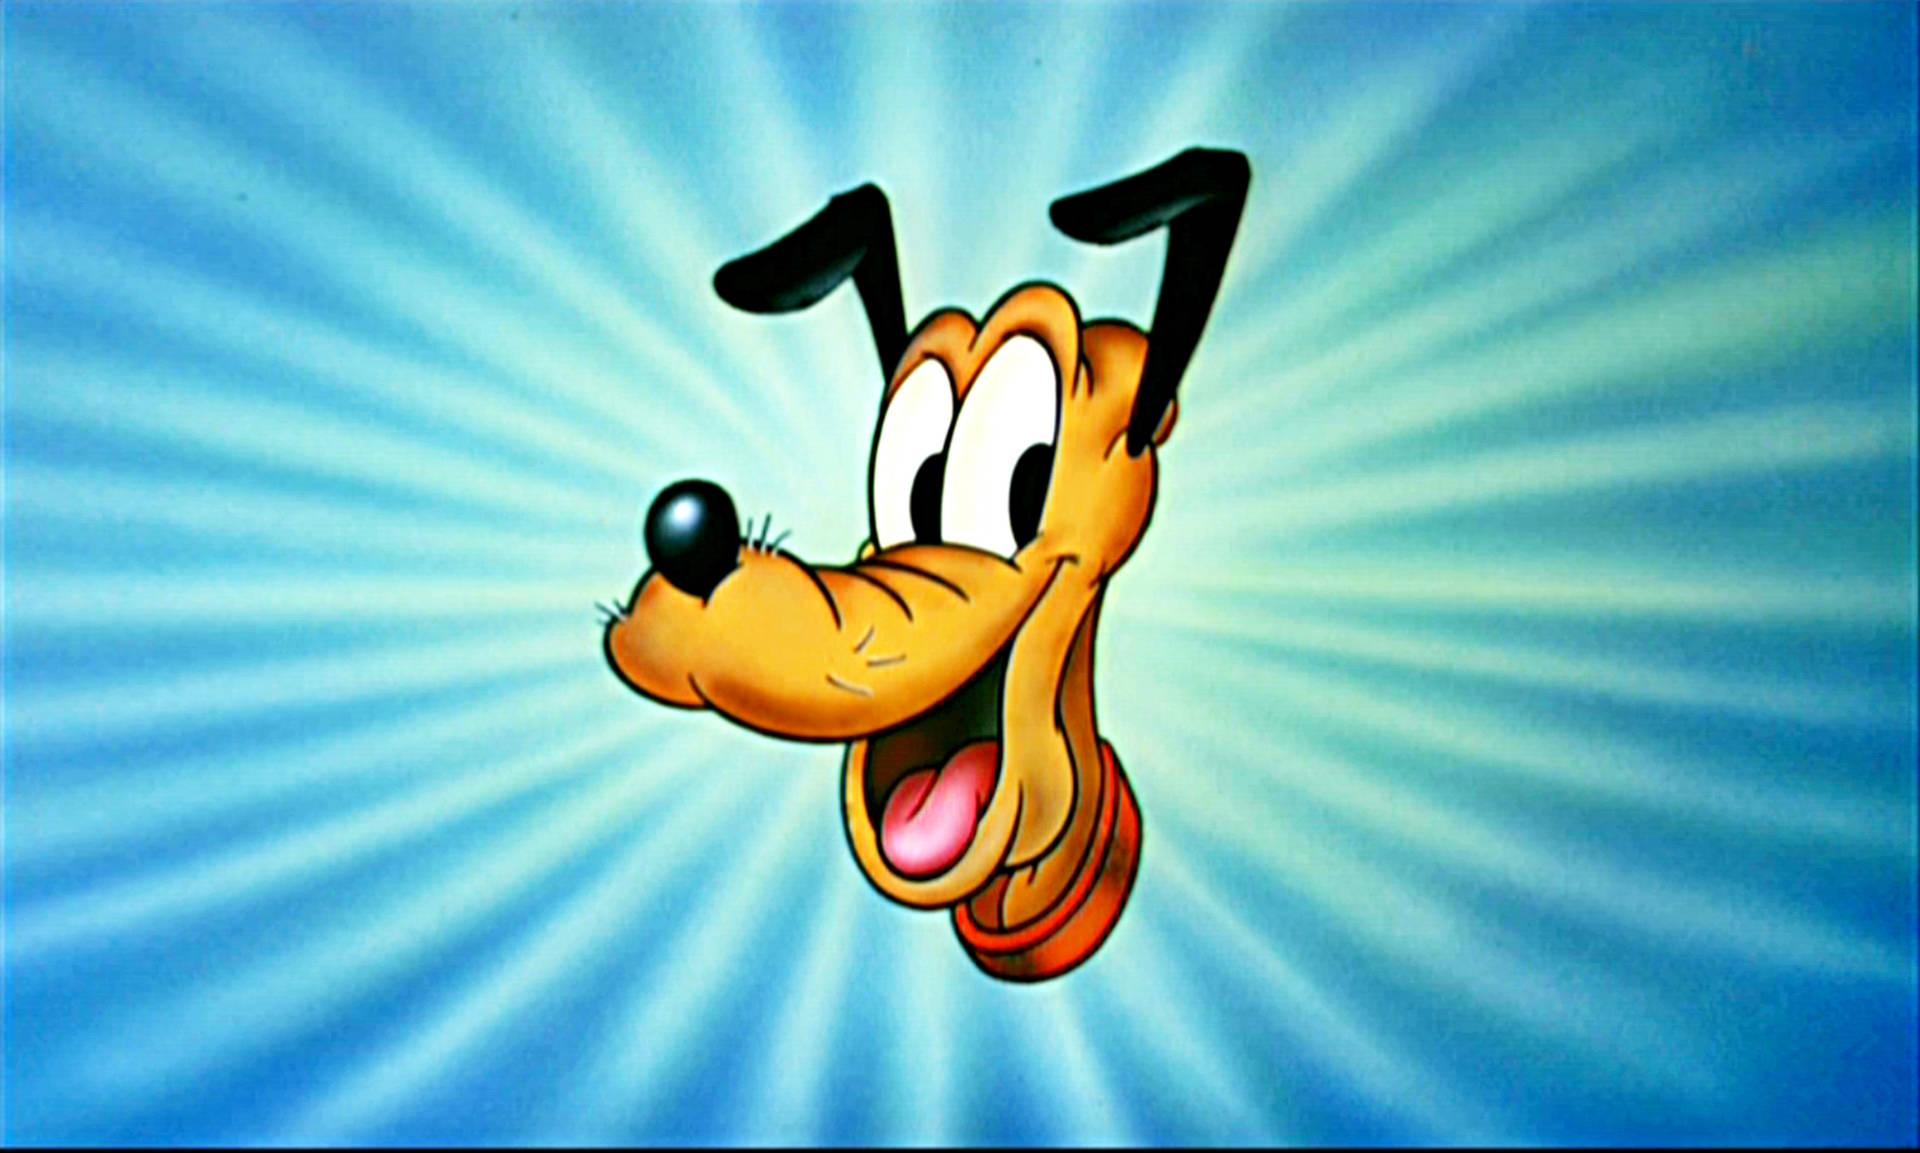 Close Up Image Of Disney's Pluto With A Playful Charm. Background